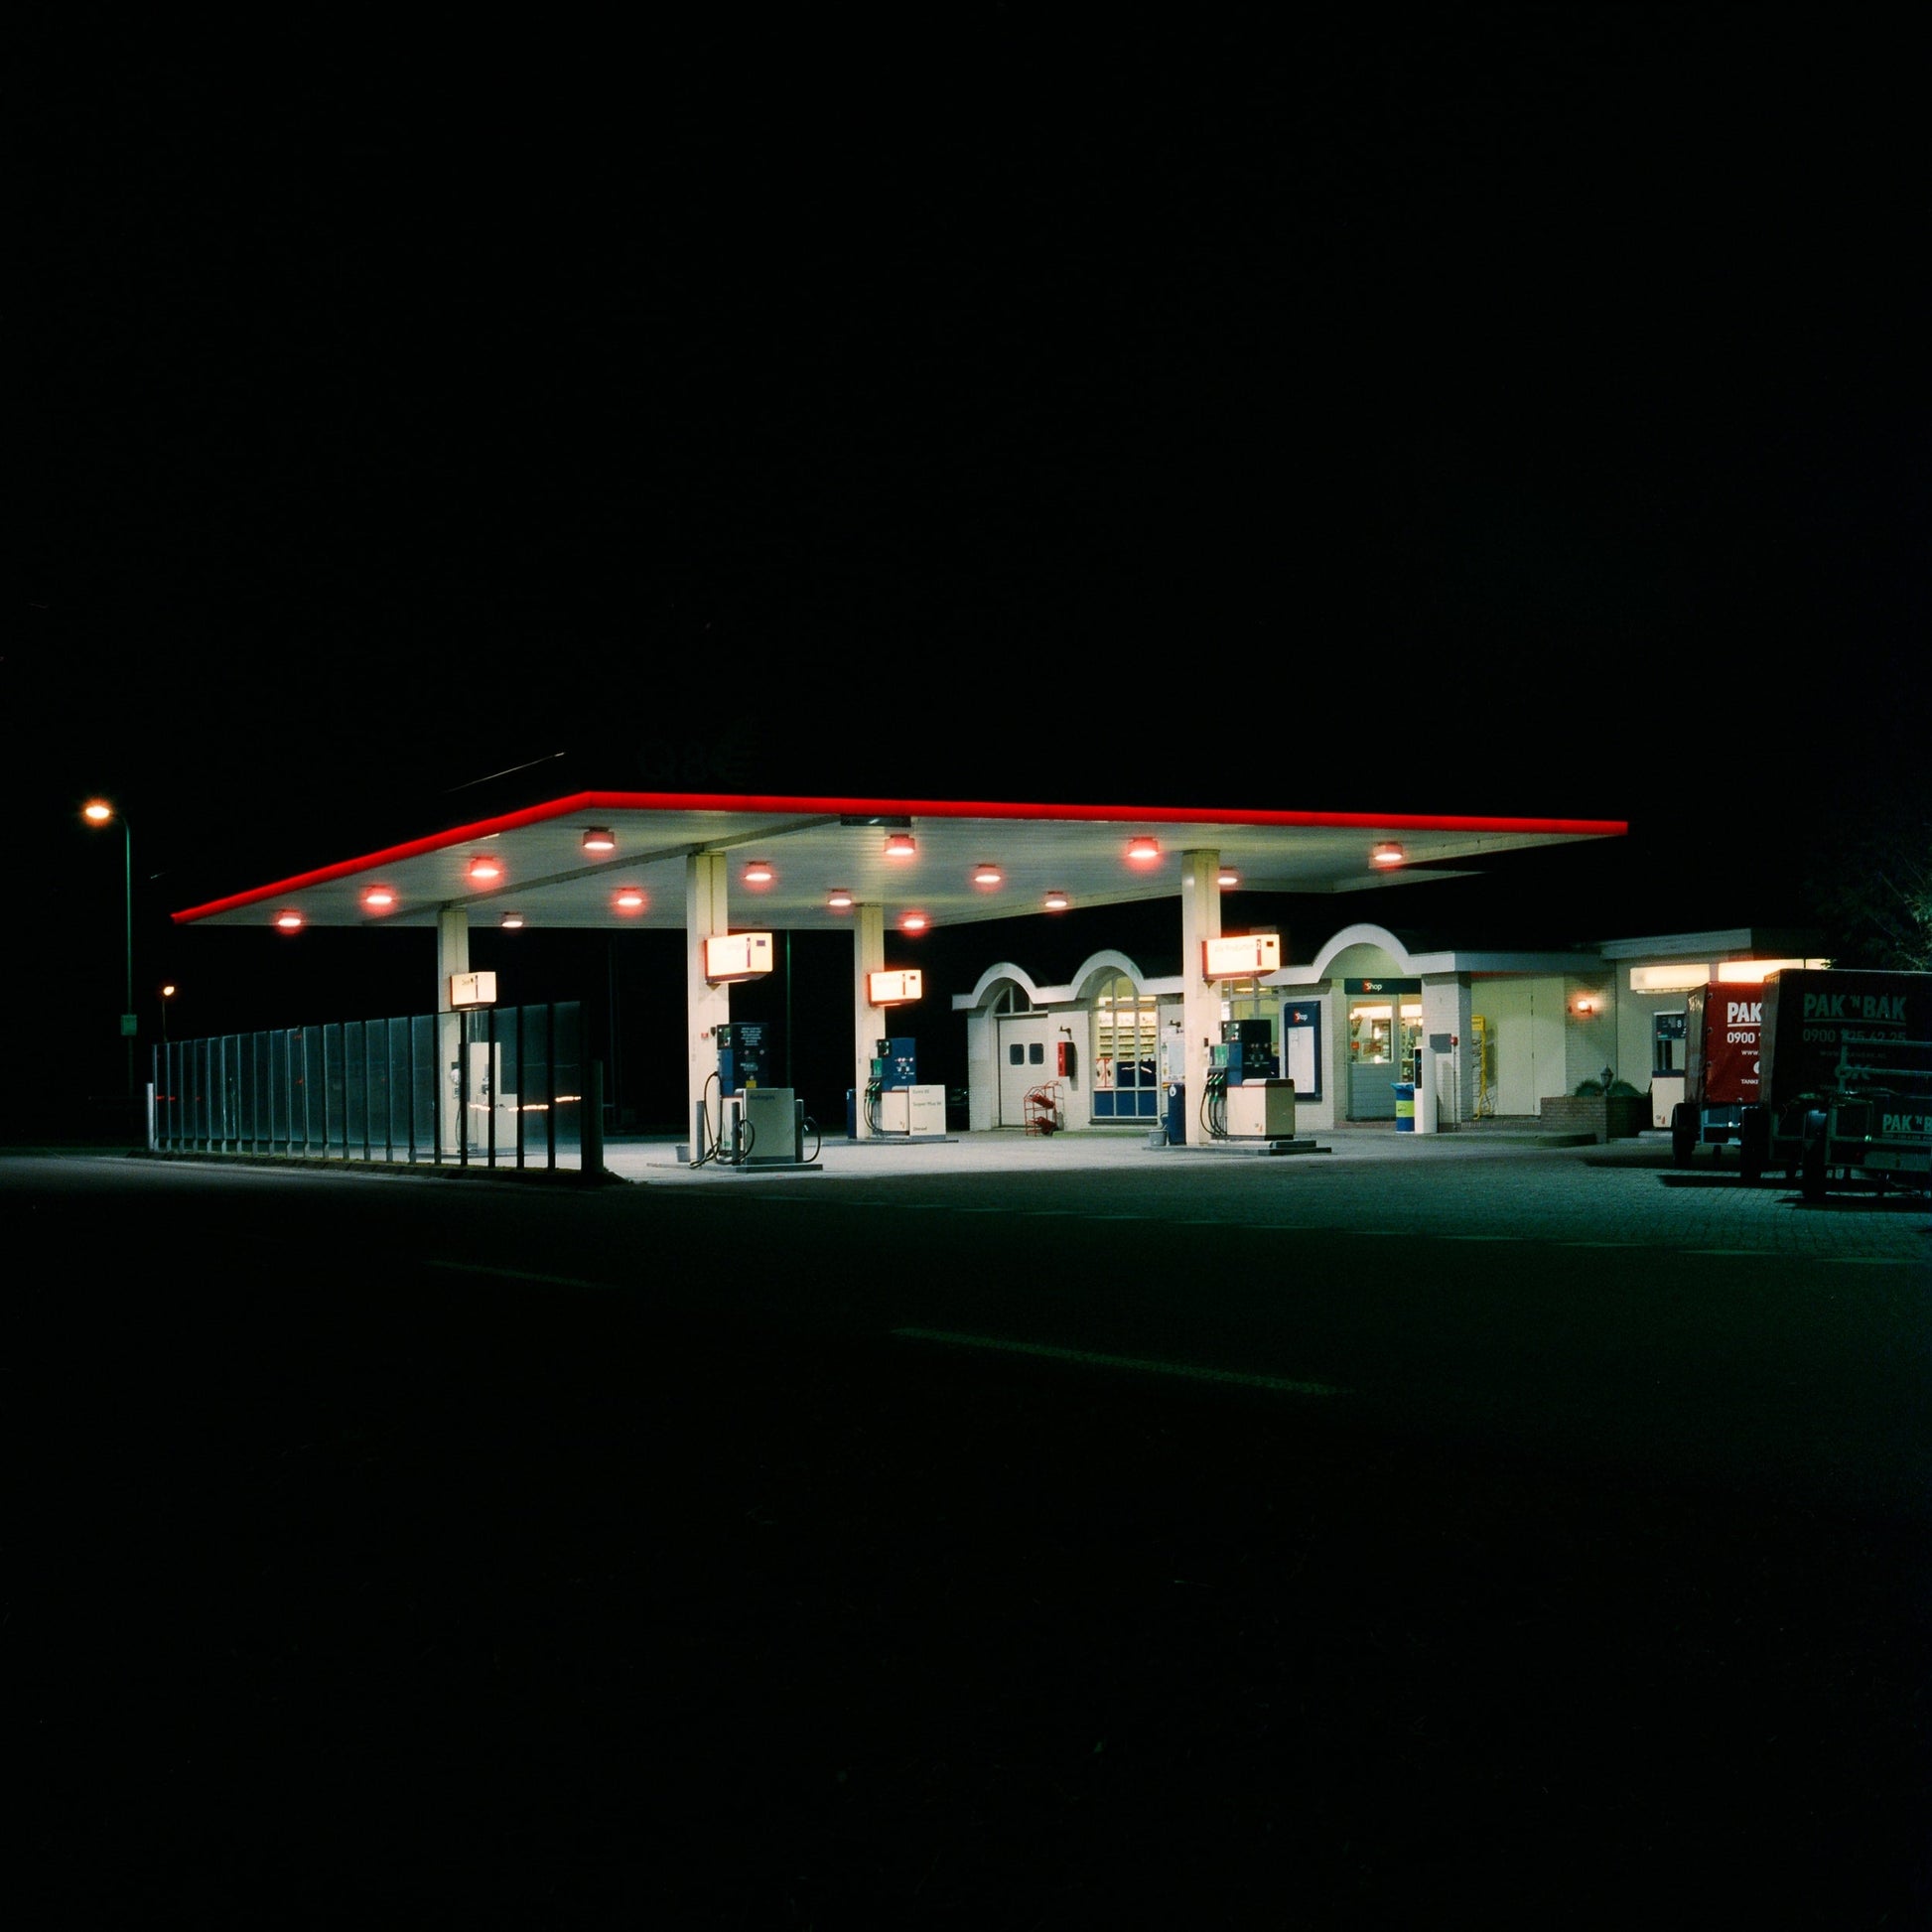 The artwork 'Exterior #1' by Jildo Tim Hof showing a gasstation with bright lights at night surrounded by darkness